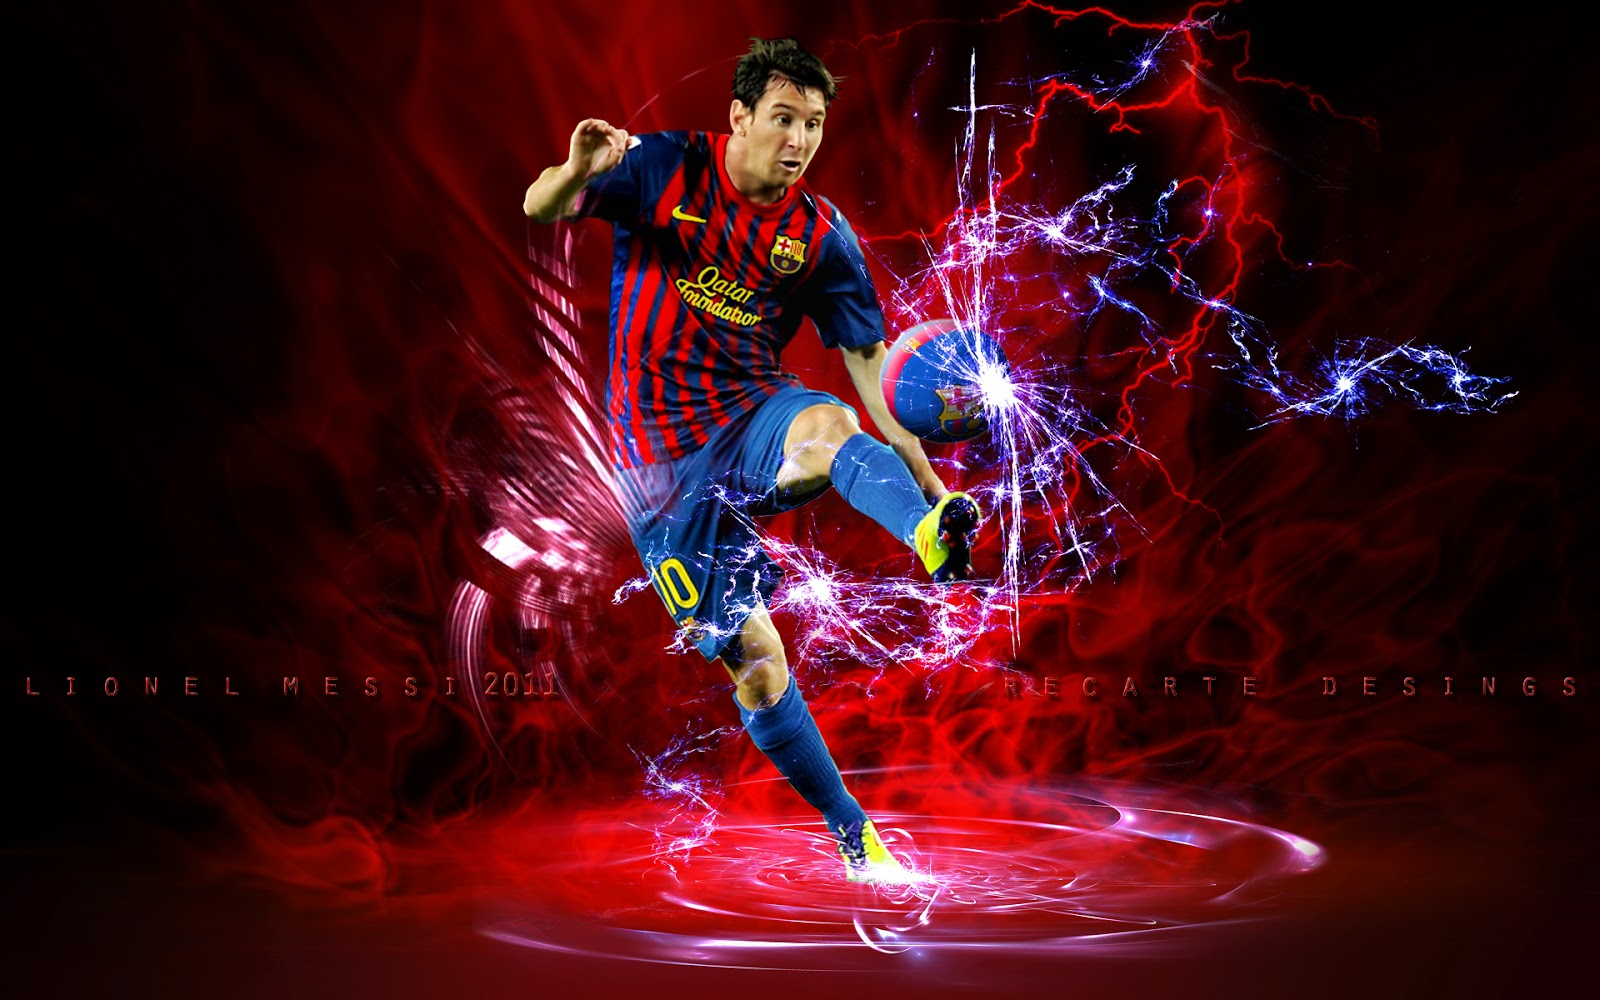 Lionel Messi Picture by Recarte Desings